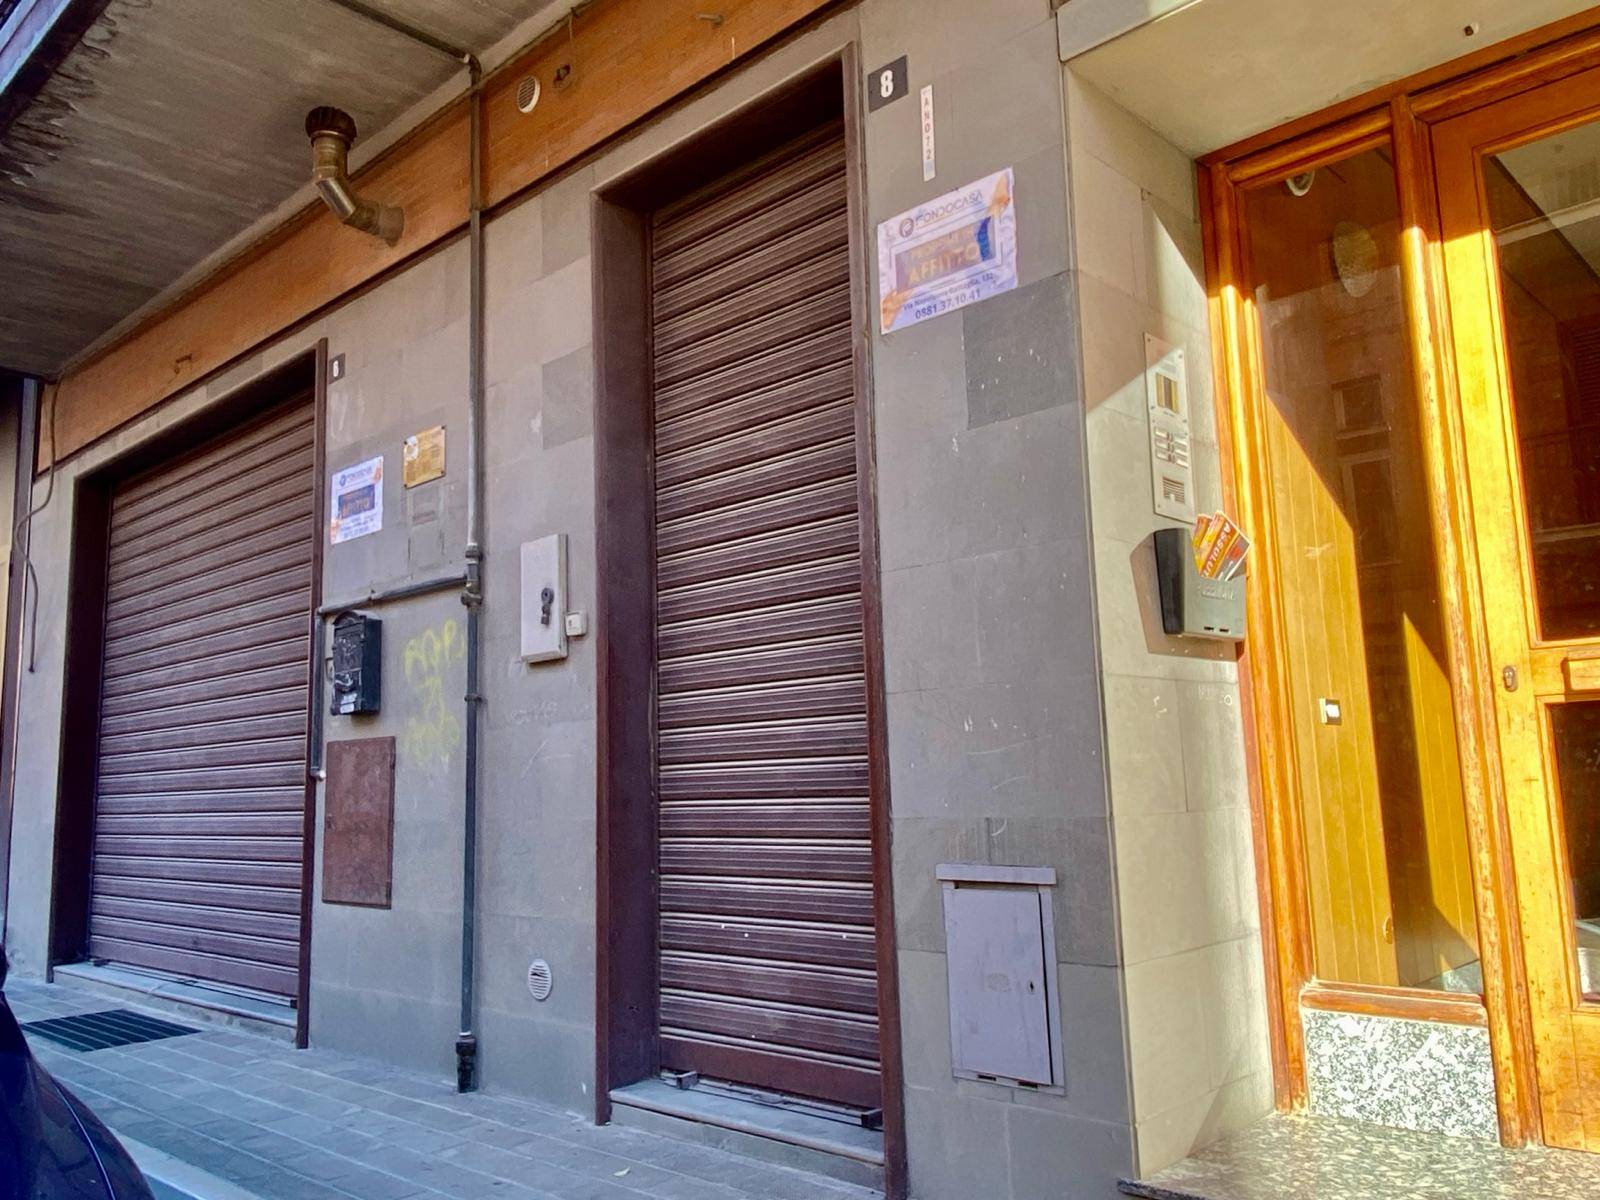 Locale commerciale in affitto a Lucera